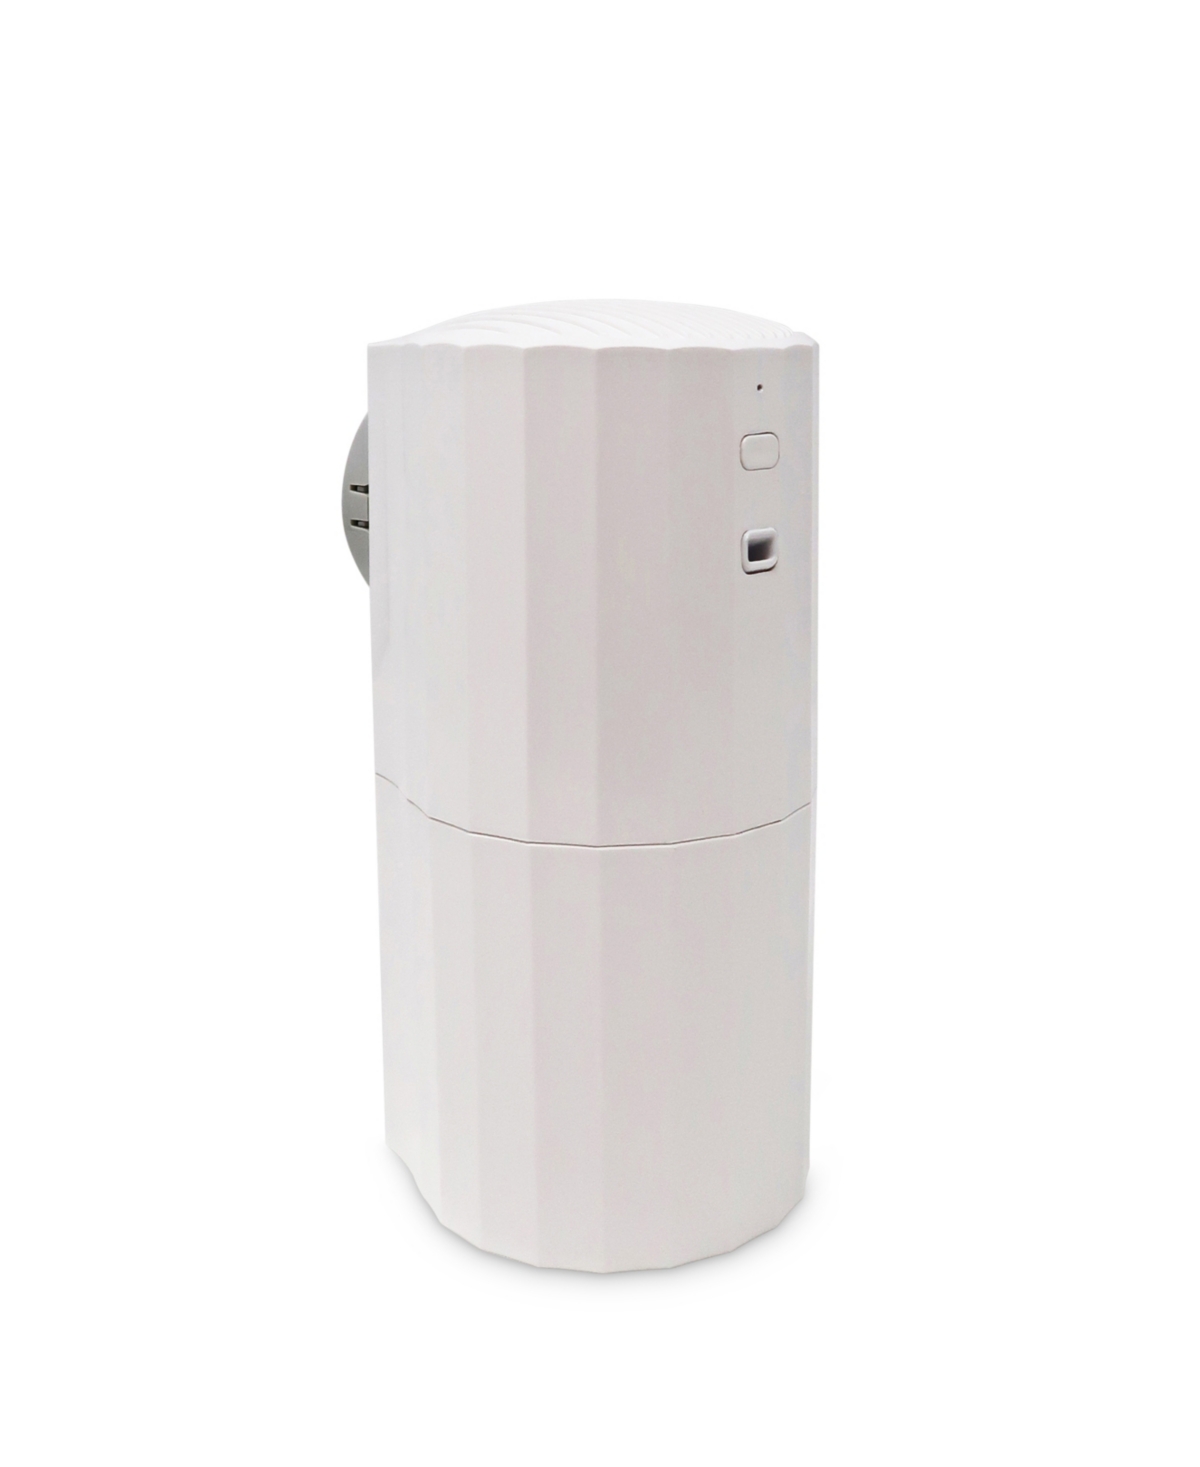 Lily of the Valley Scent, White Plug- in Diffuser - White